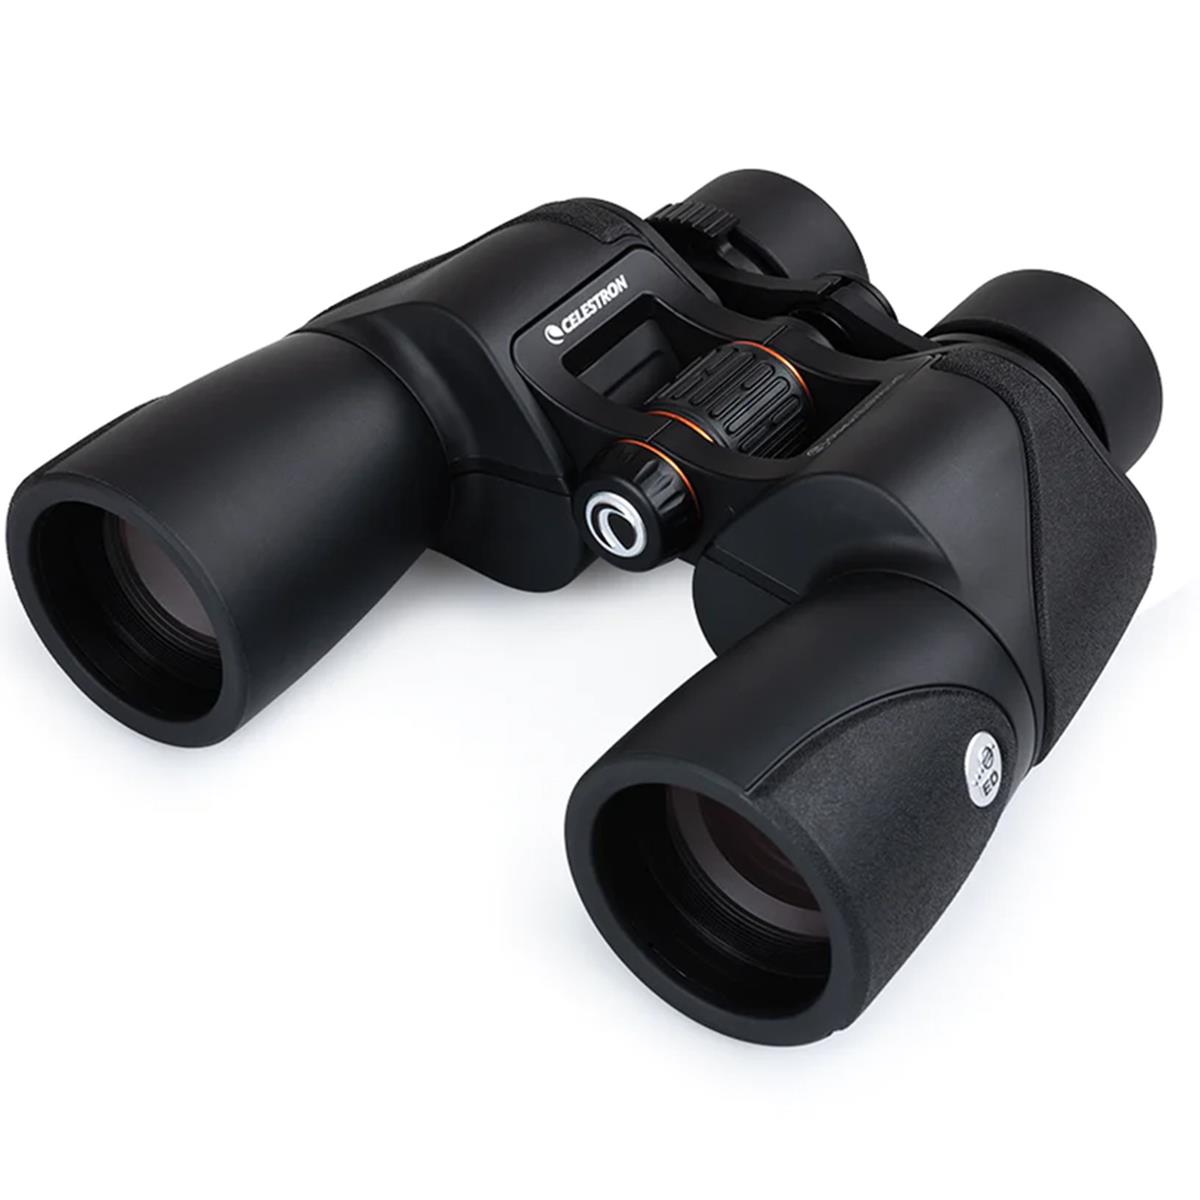 Image of Celestron 7x50mm SkyMaster Pro ED Porro Binoculars with 7.8 Degree Angle of View